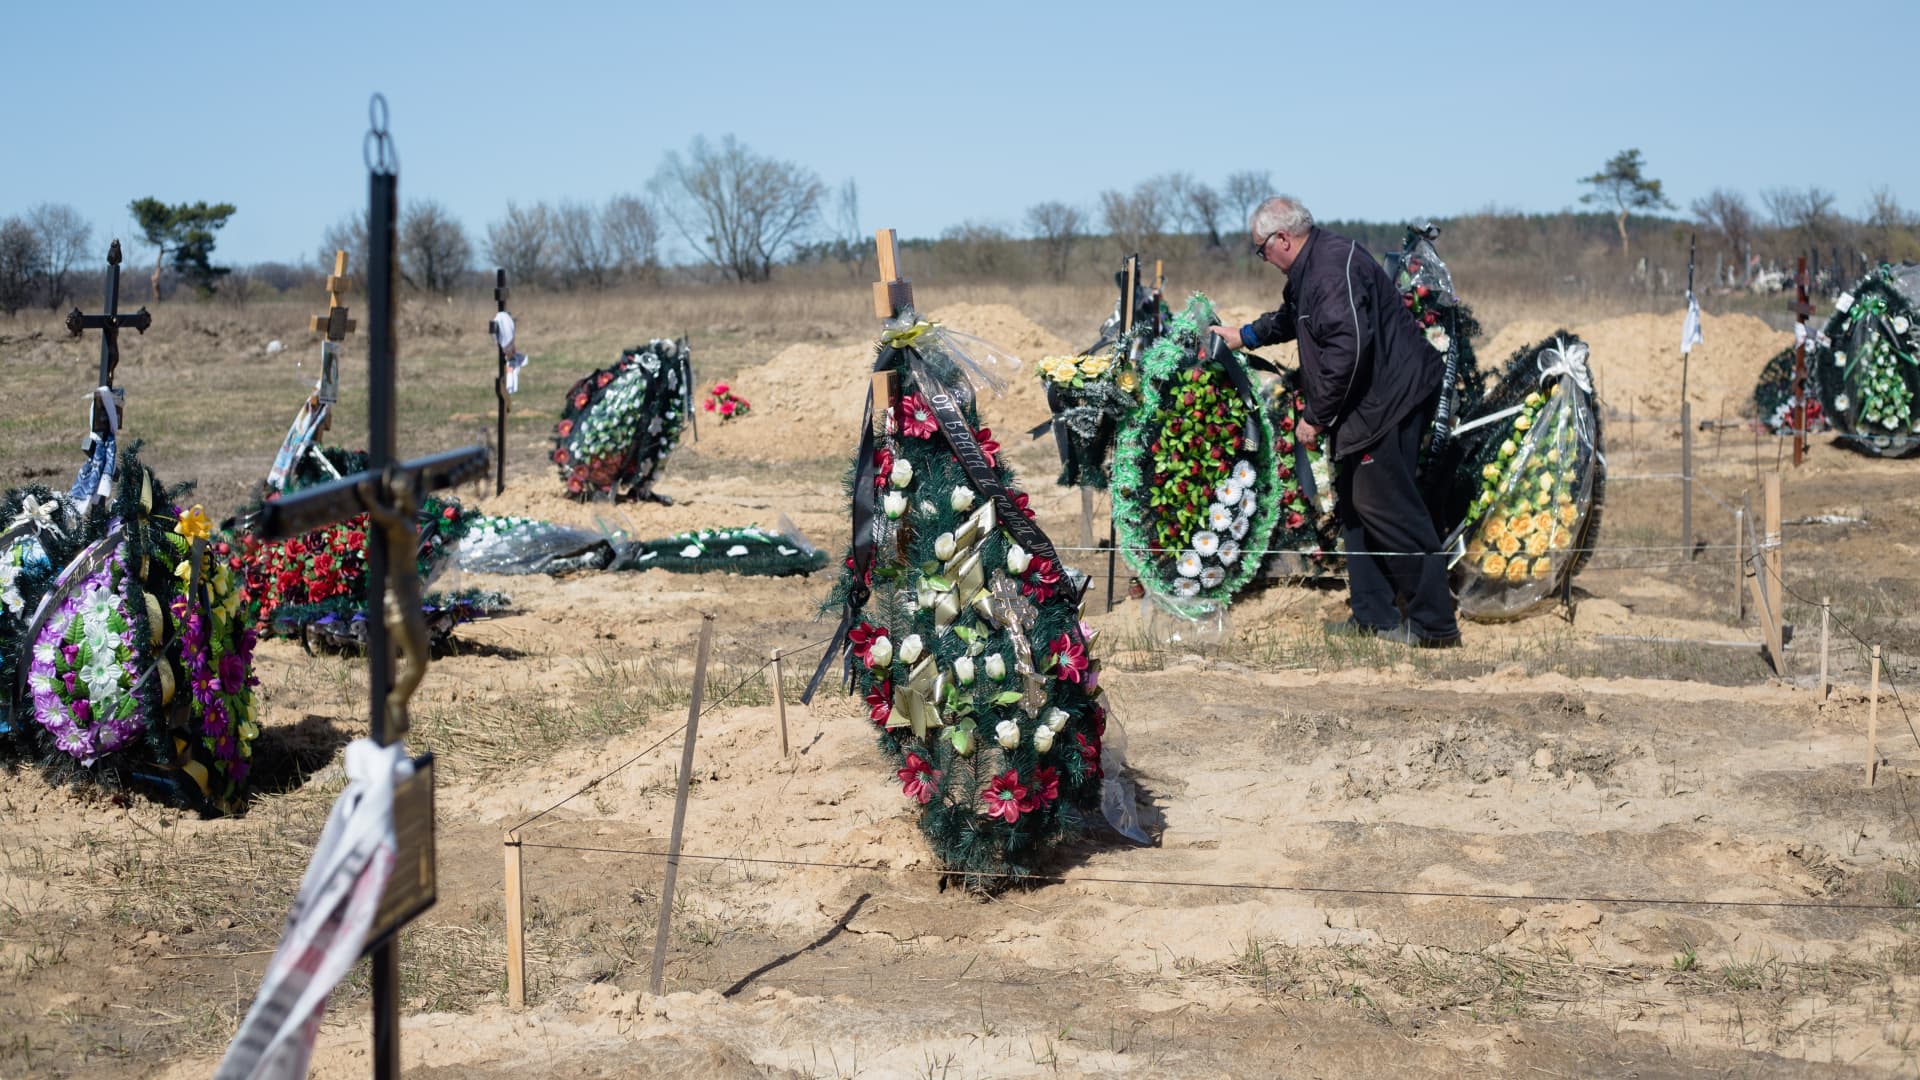 A man fixes the wreath on the grave in a cemetery on April 14, 2022 in Hostomel, Ukraine.